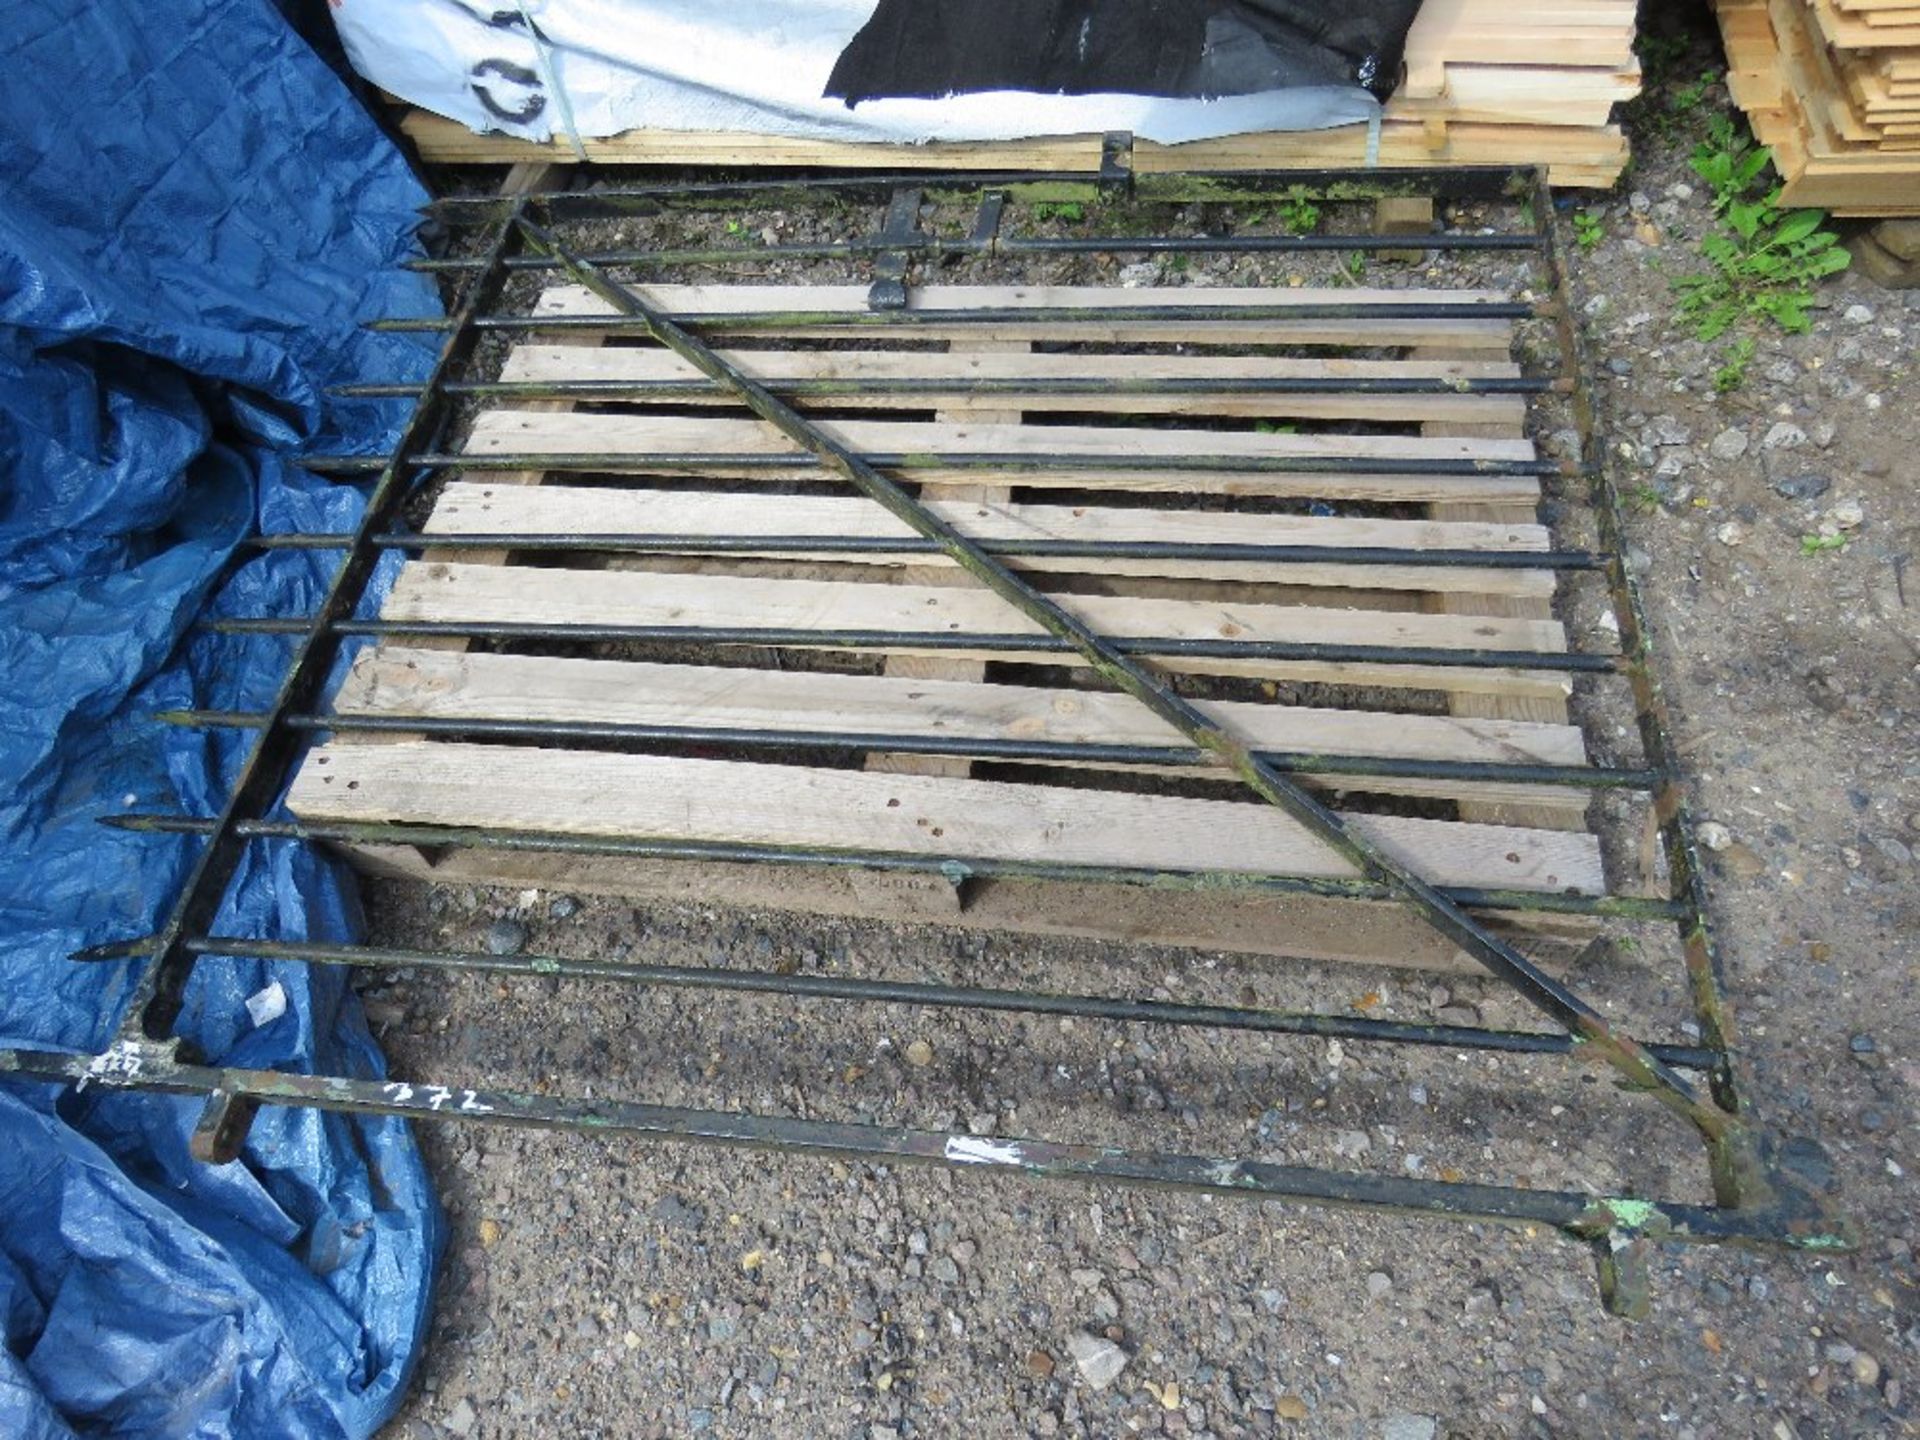 SPIKE TOP METAL GATE, 4FT WIDE X 5FT HEIGHT APPROX.